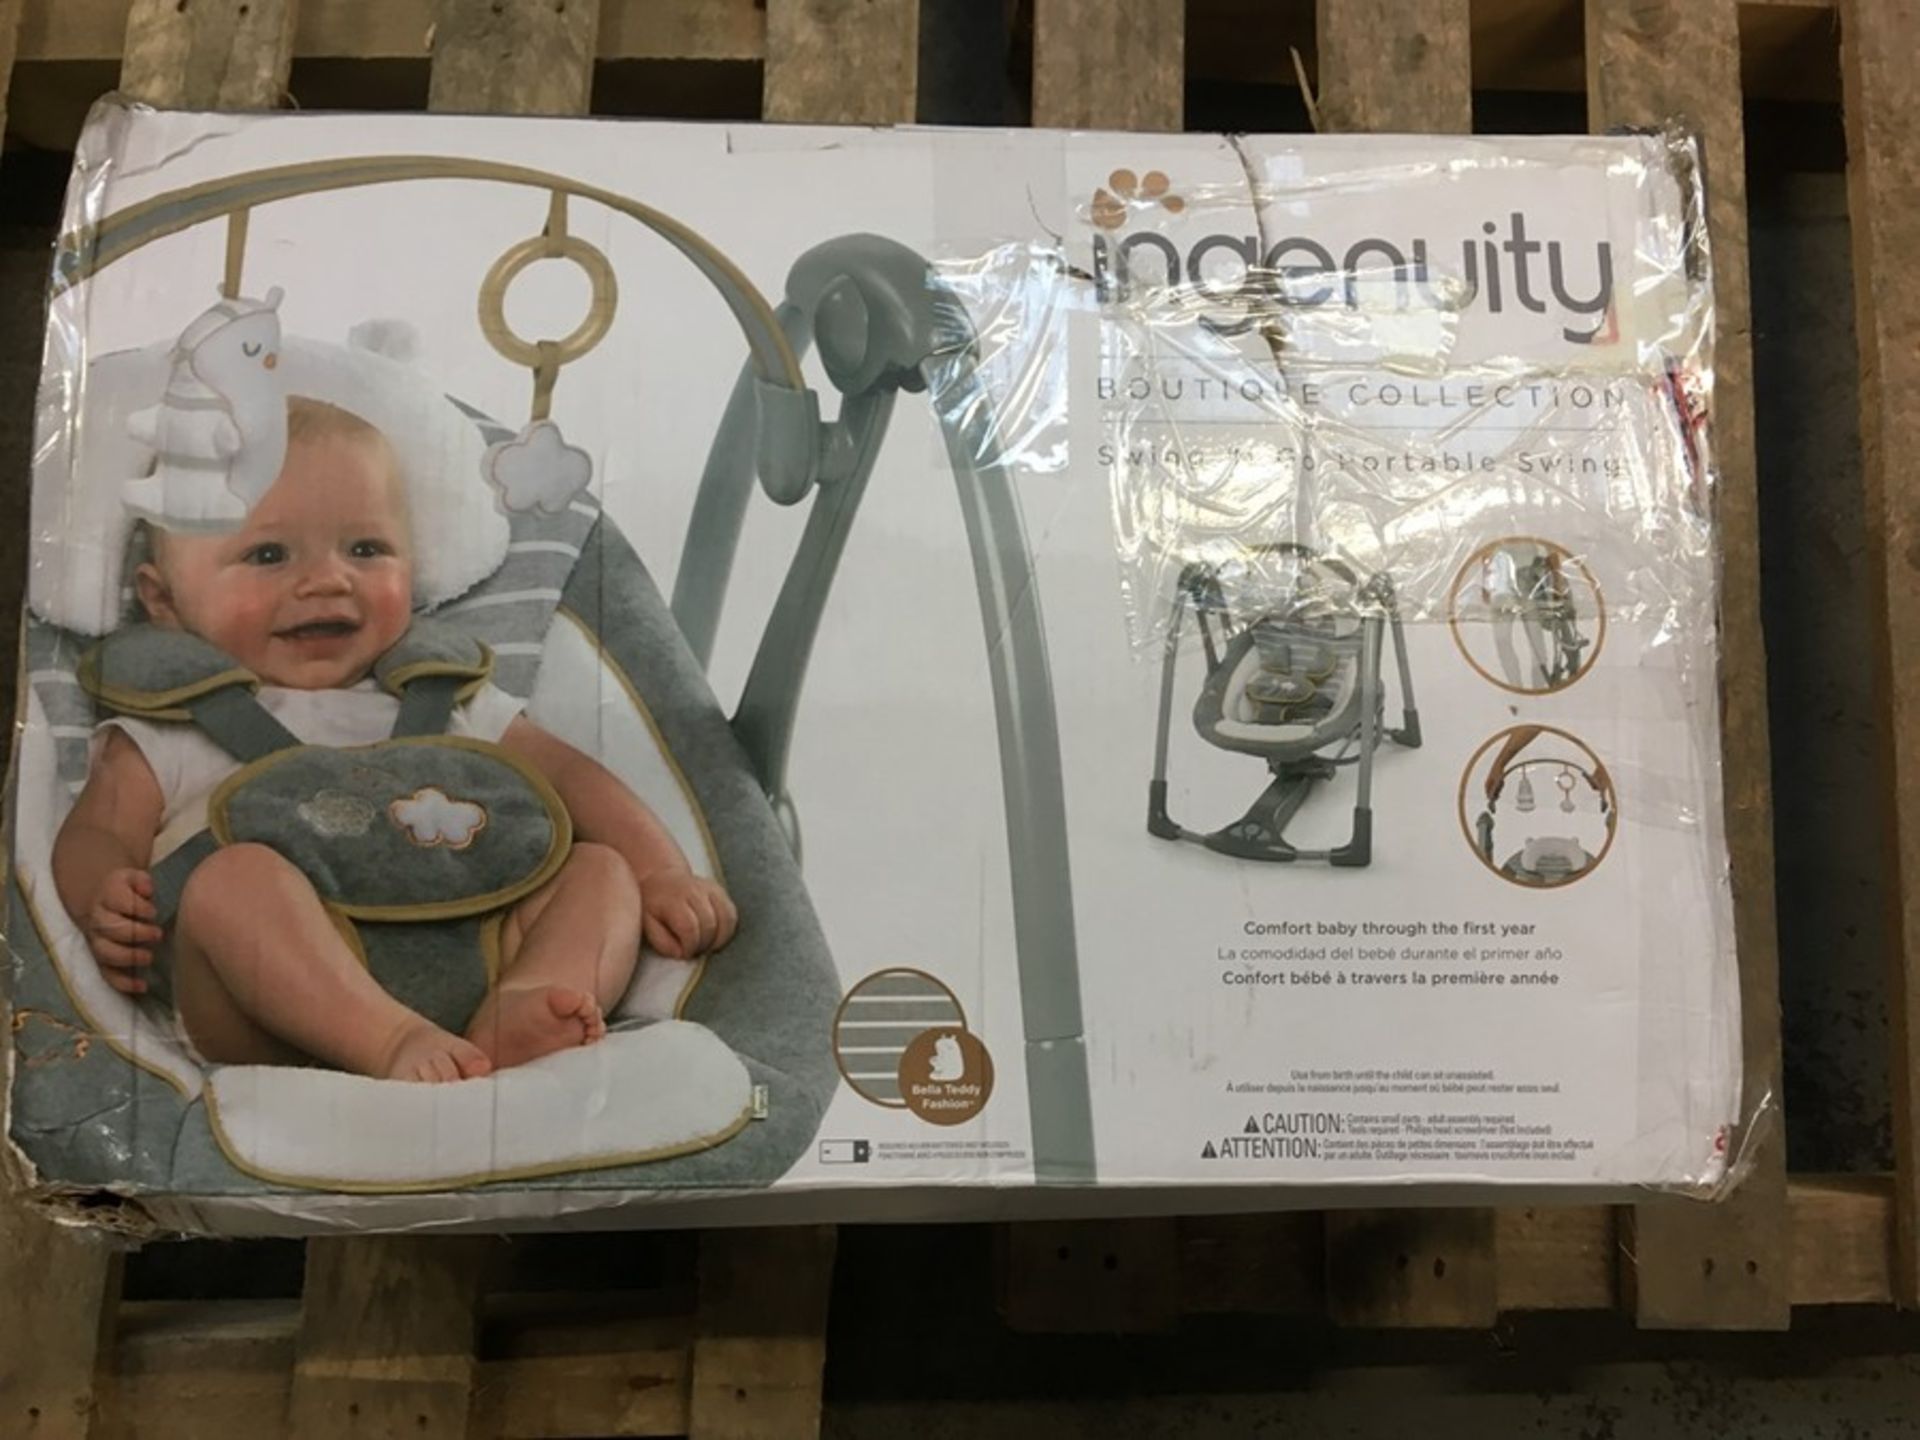 1 BOXED INGENUITY BOUTIQUE COLLECTION SWING AND GO PORTABLE SWING / RRP £99.99 (PUBLIC VIEWING